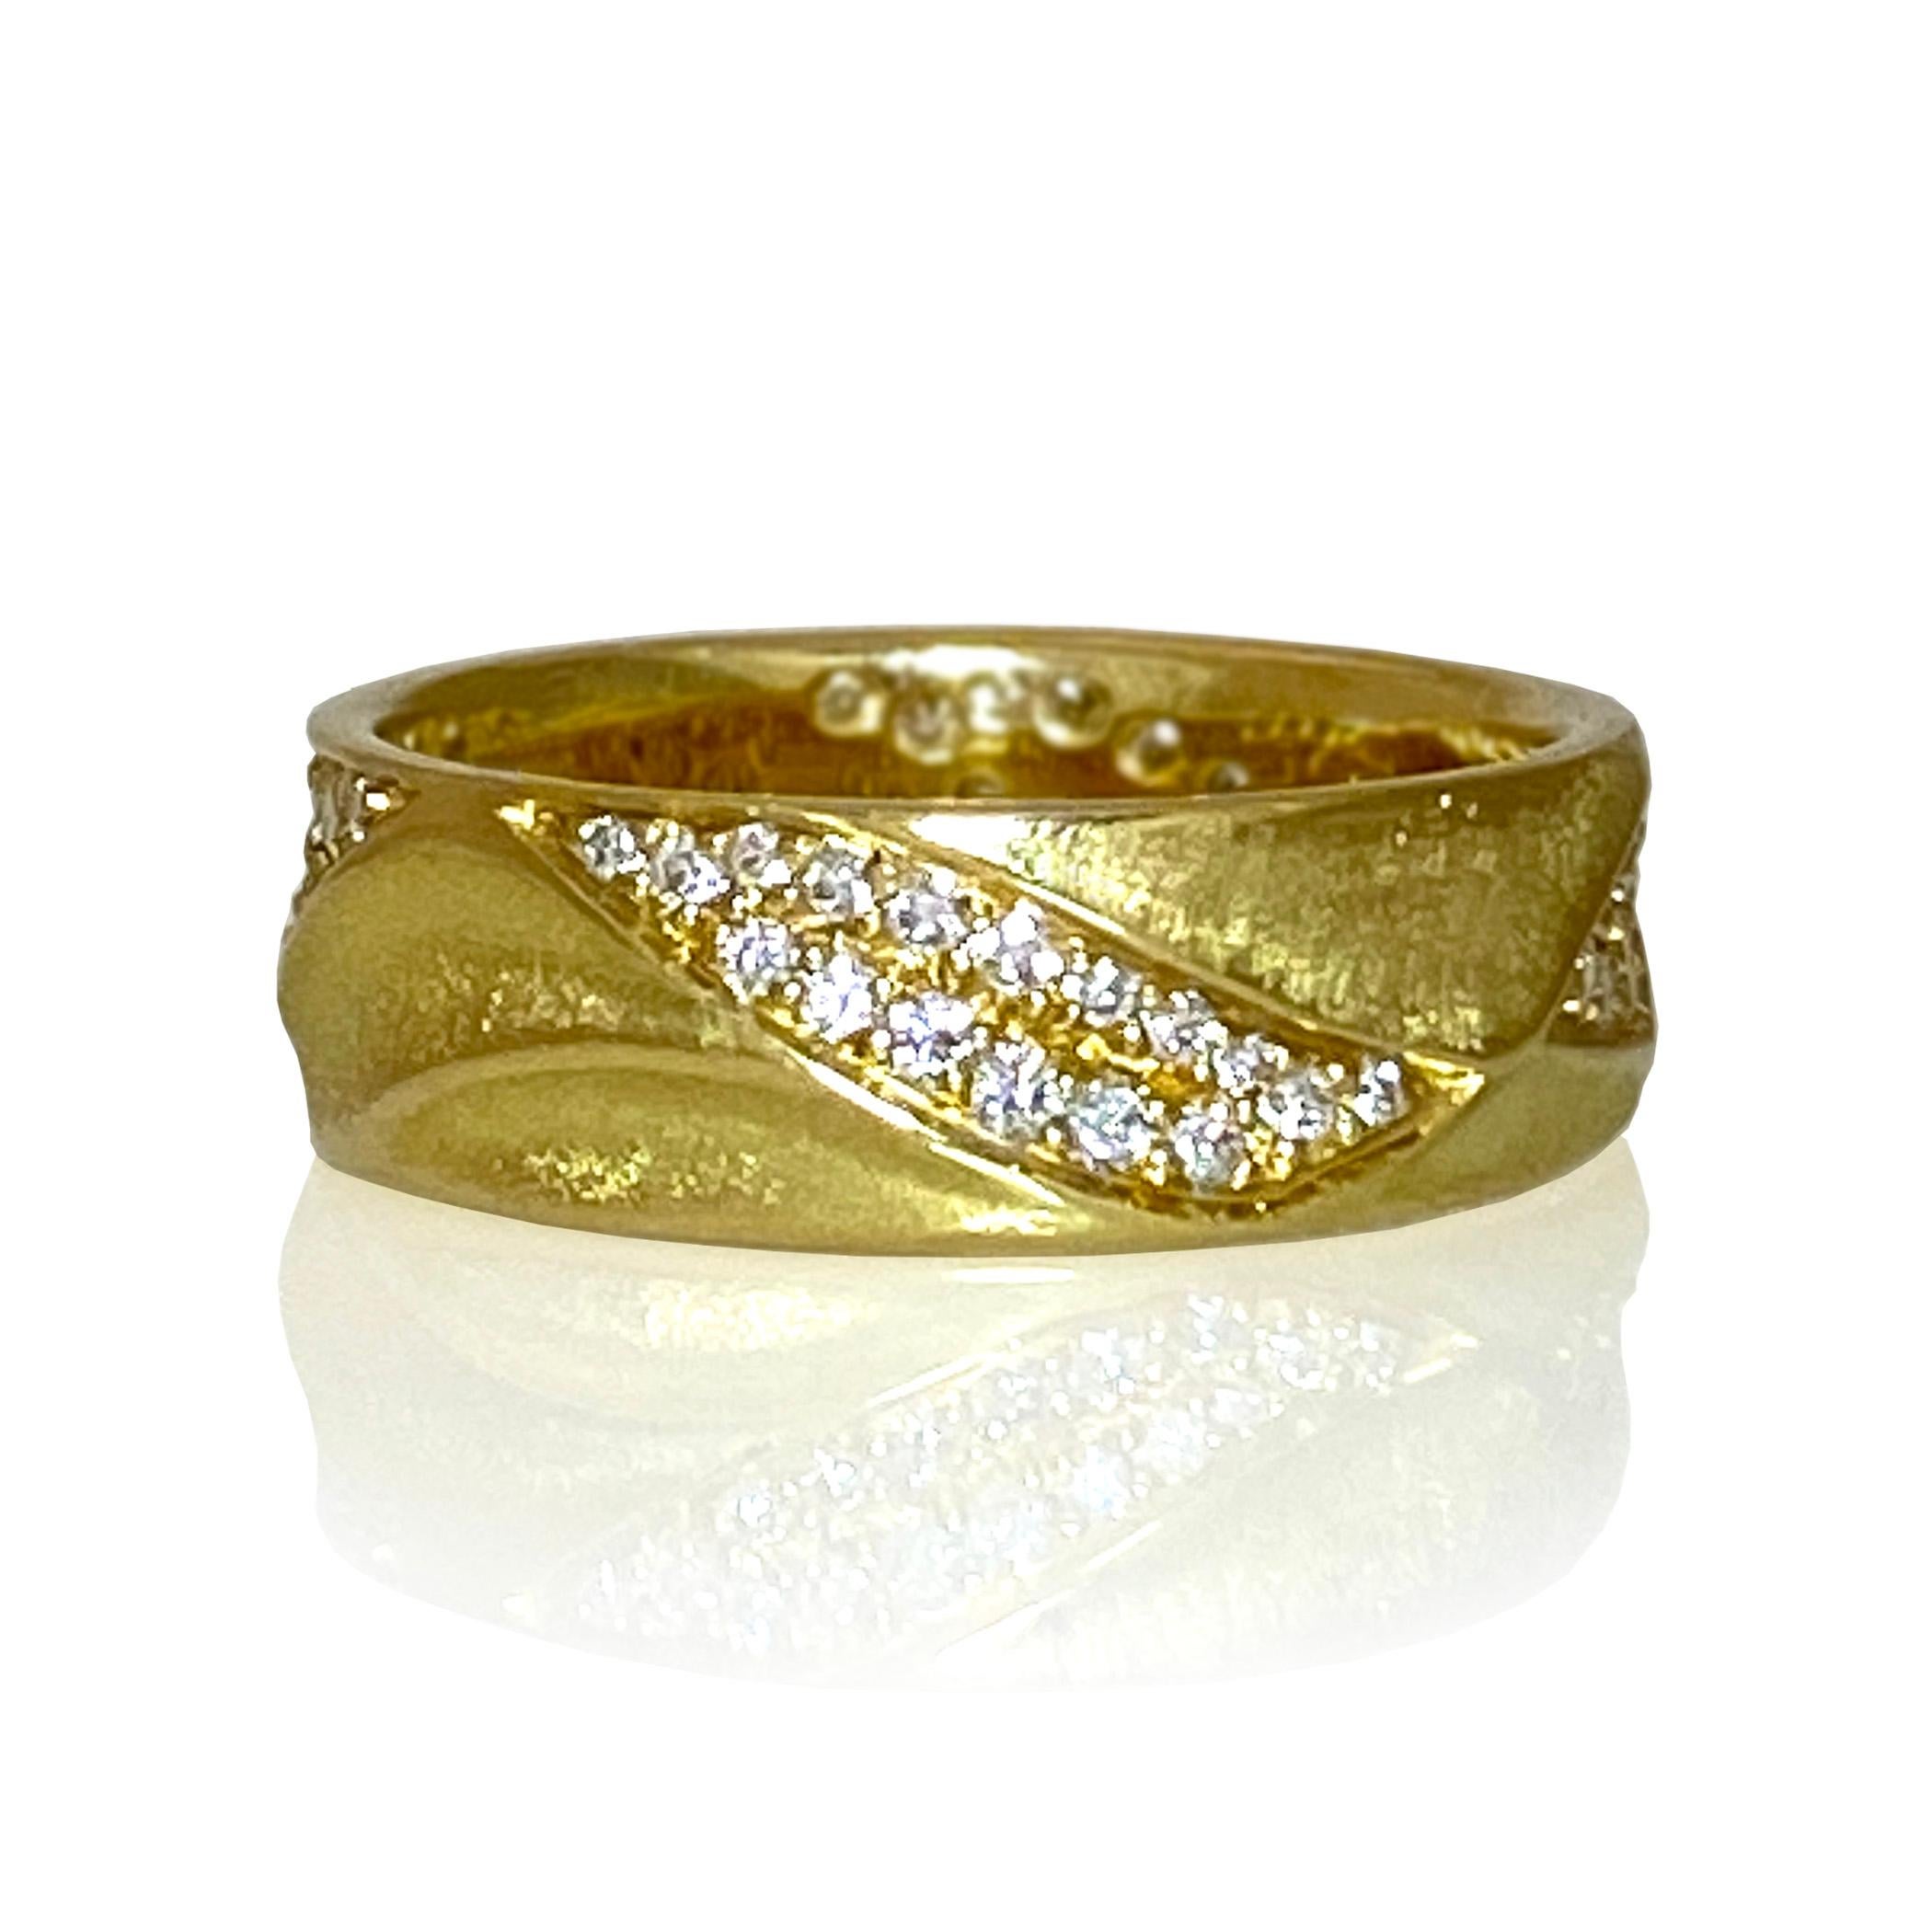 For Sale:  Small 18 Karat Yellow Gold Eternal Dune Band Ring with Diamonds from Keiko Mita 2